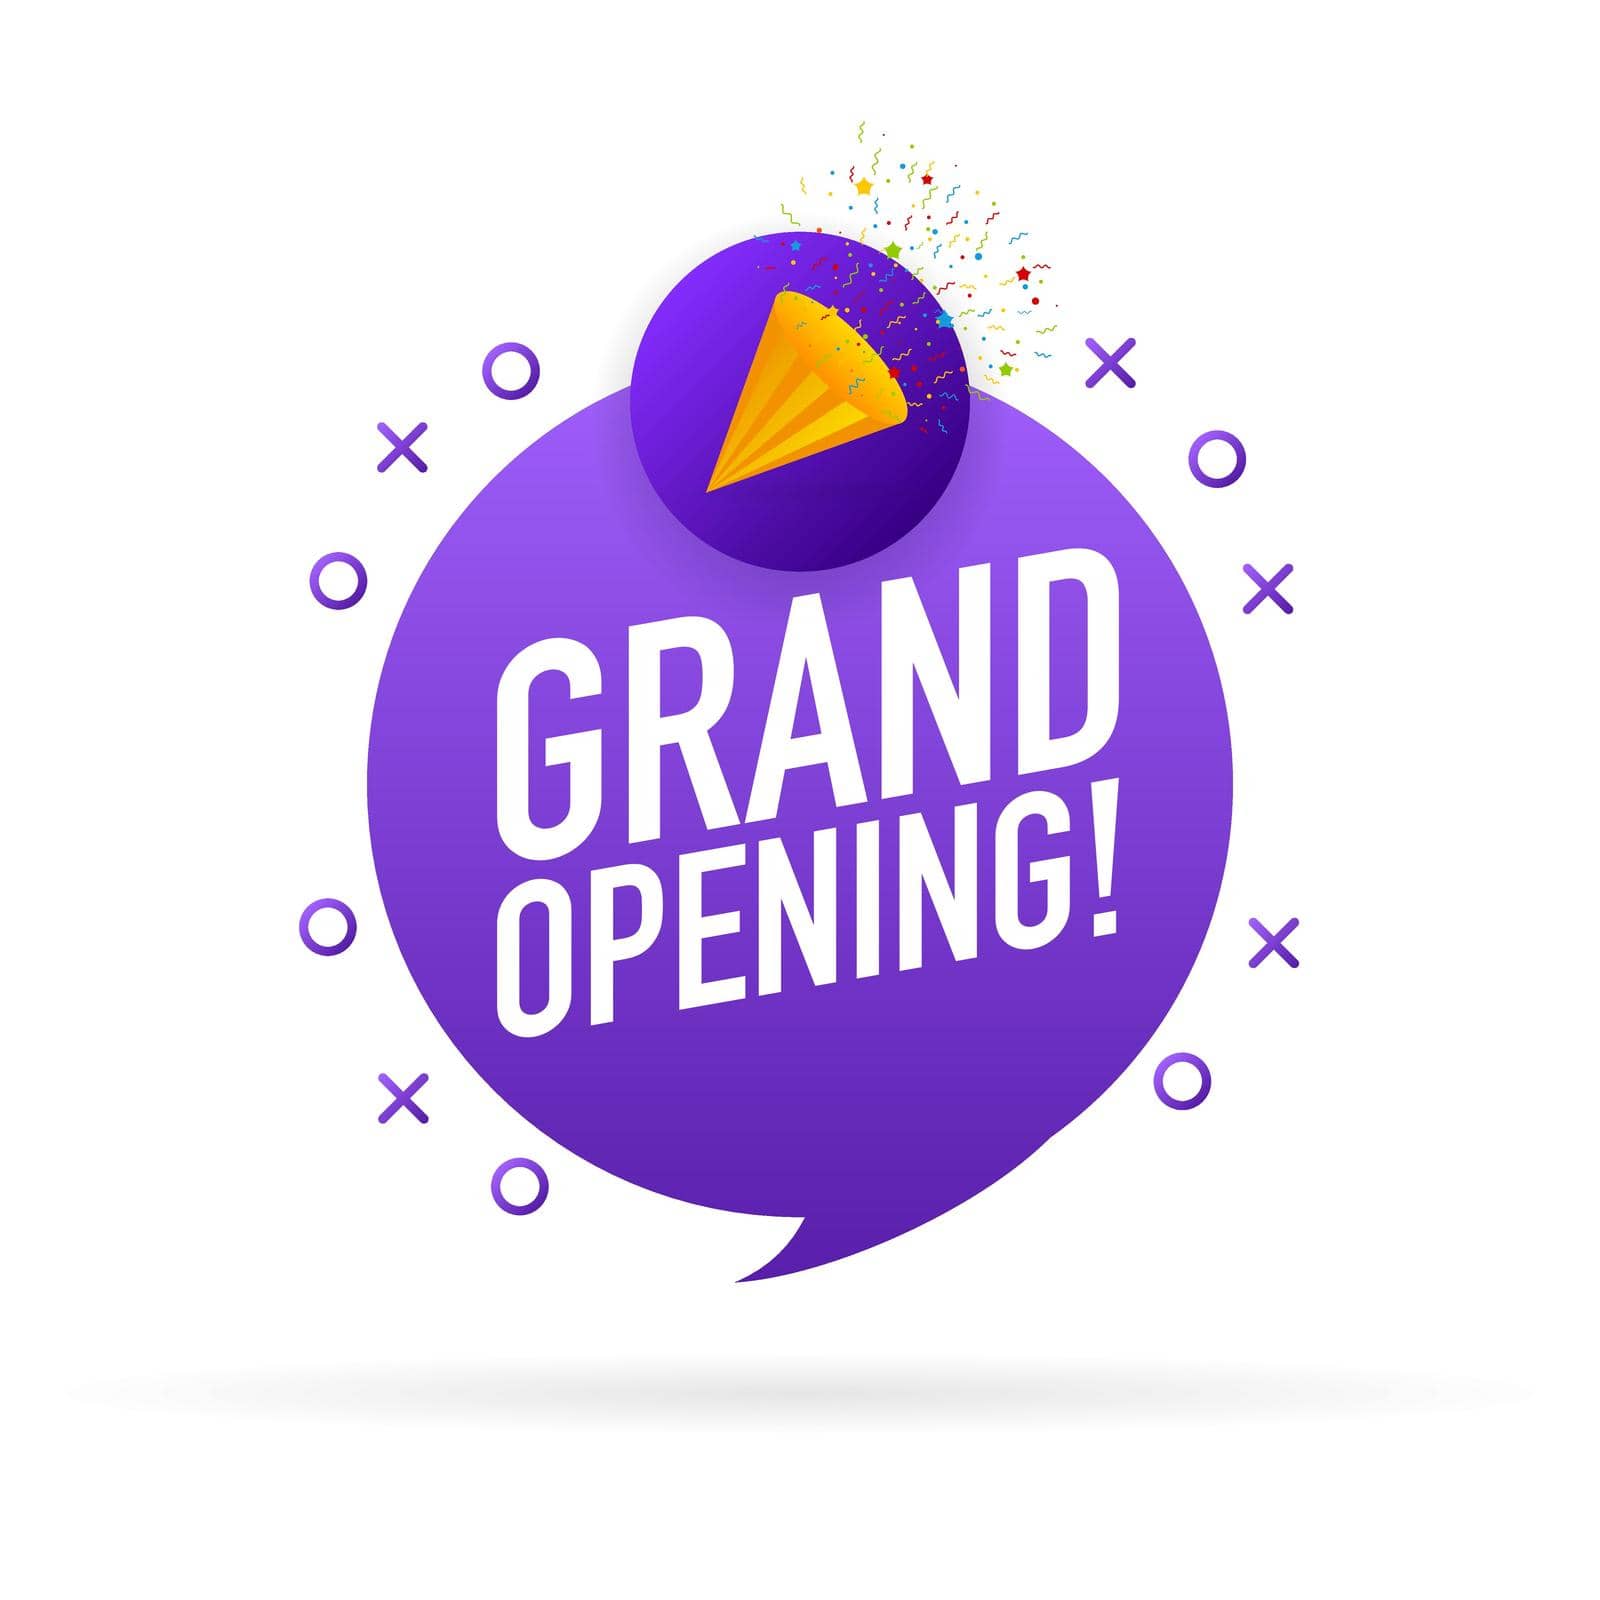 Grand opening purple banner in flat style on white background. Vector illustration.